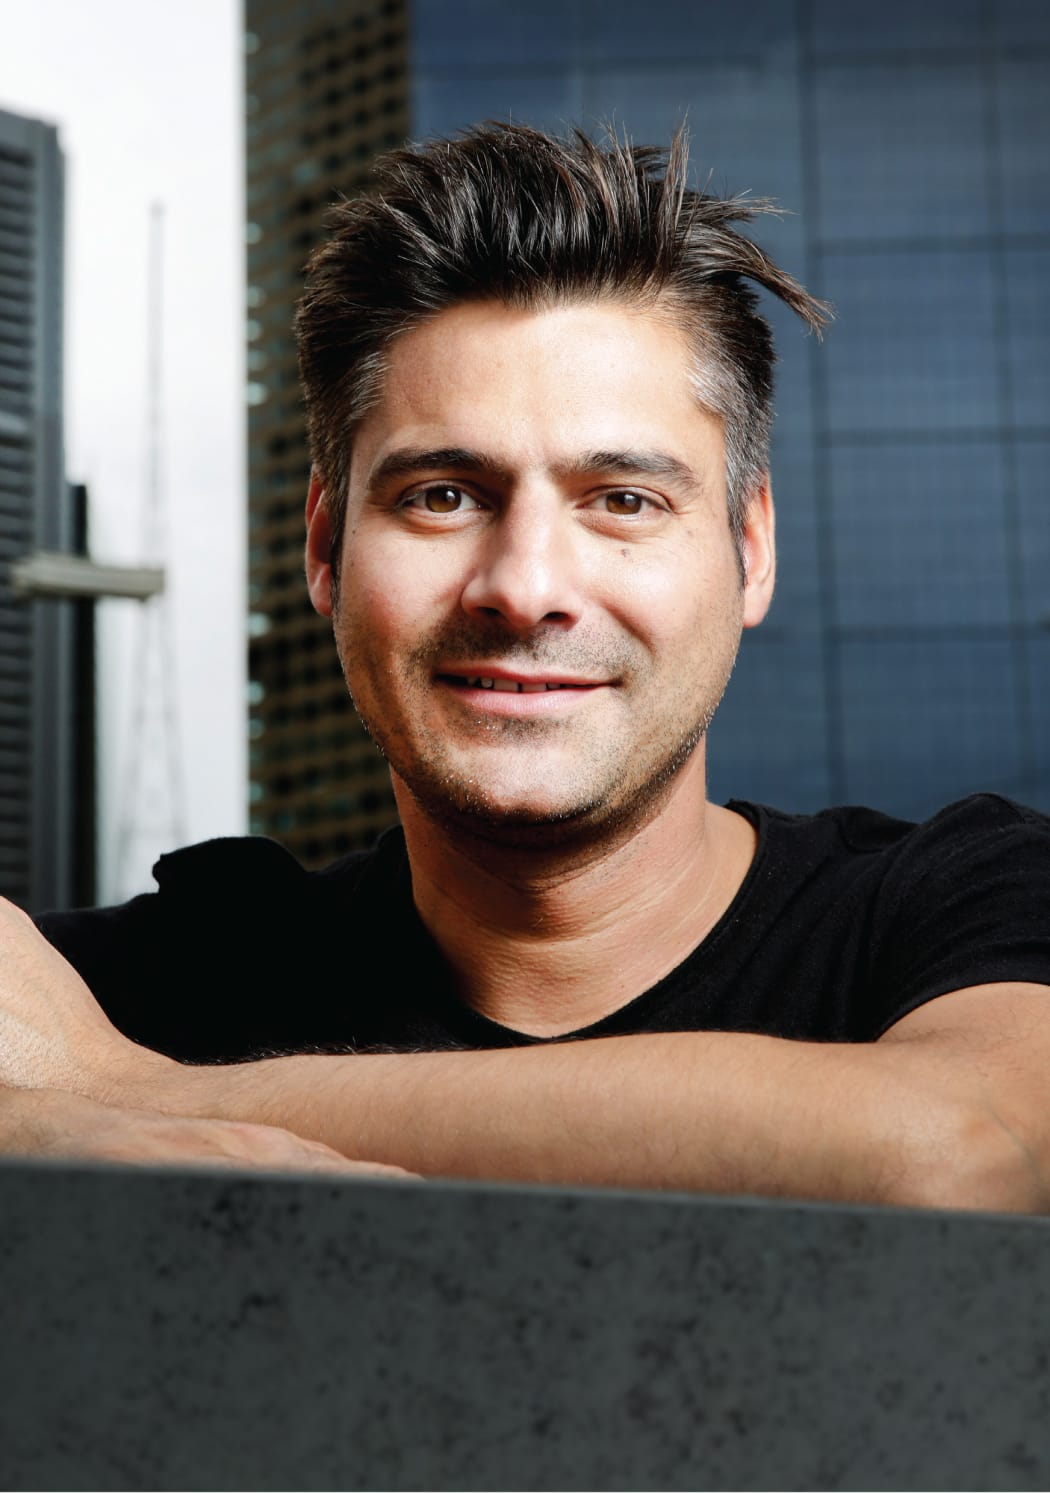 Danny Bhoy is set to return to New Zealand in April, bringing with him his new show, "Age of Fools."